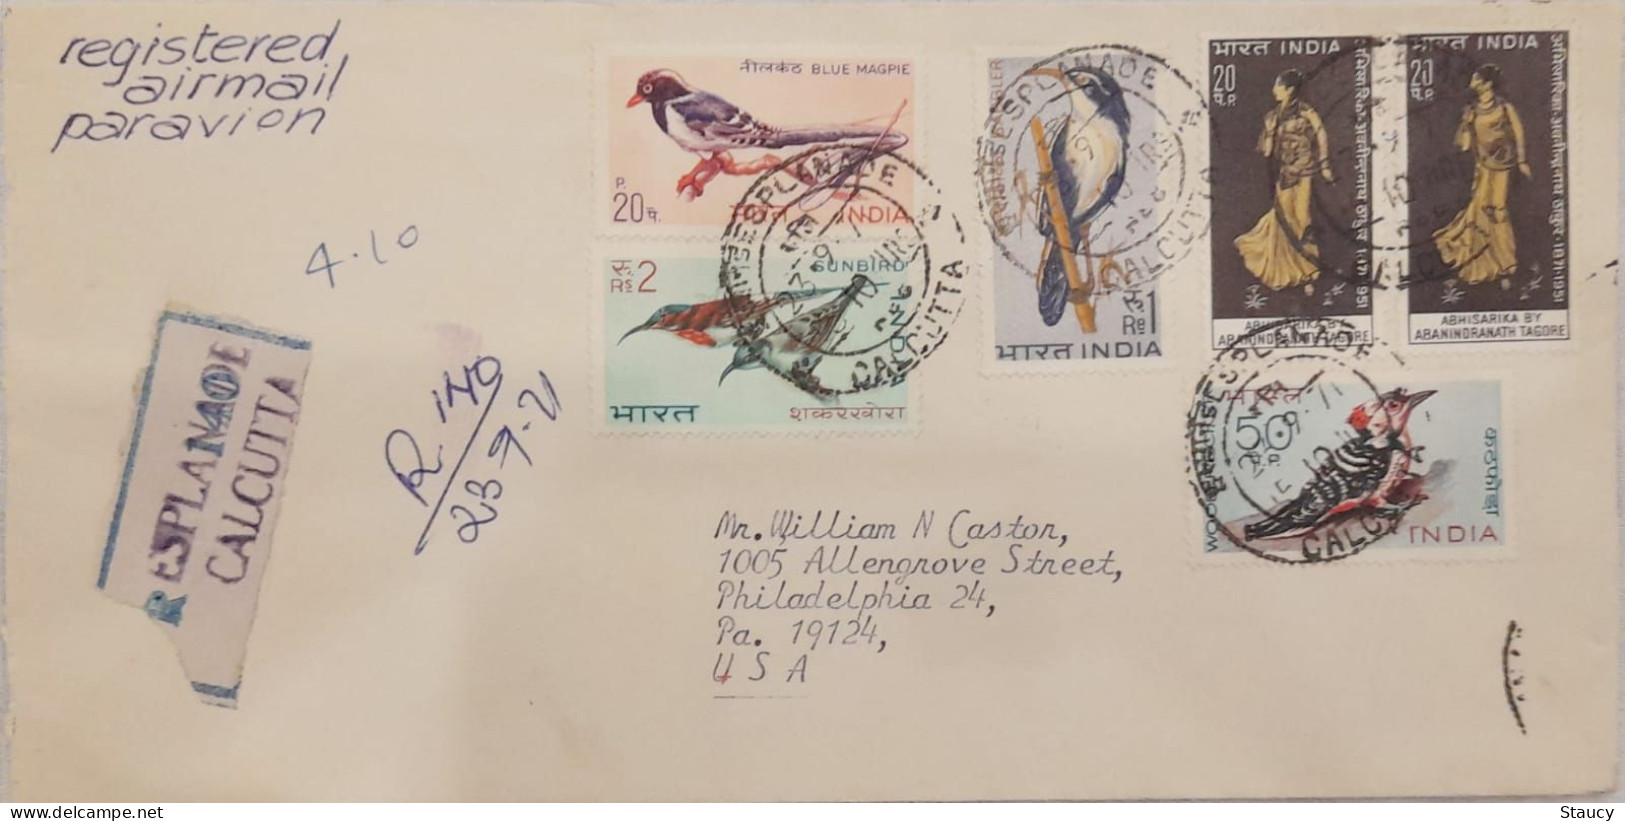 India 1968 BIRDS~Wildlife Preservation - Fauna / Birds Complete Set Of 4 Stamps USED On Registered Cover To USA As Scan - Luchtpost